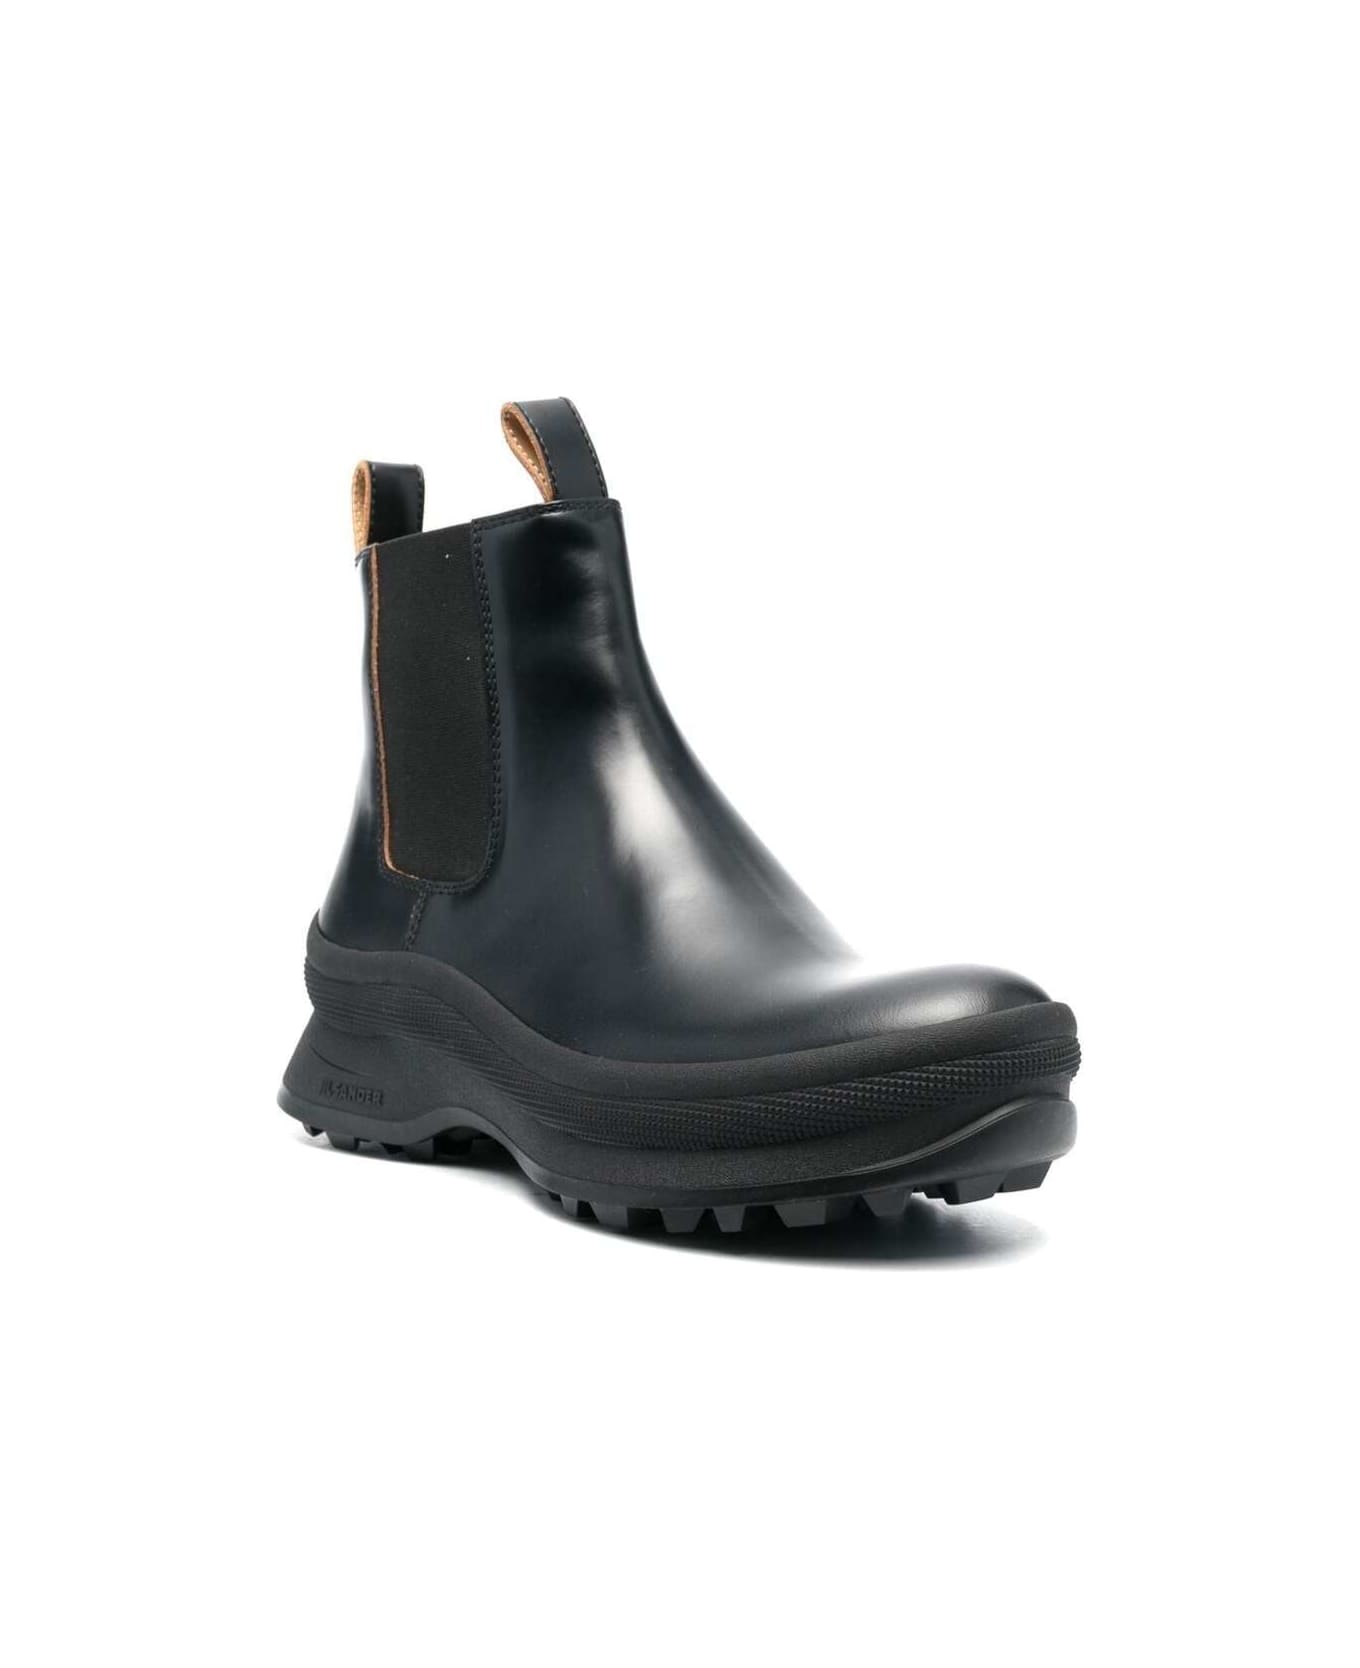 Jil Sander Black Chelsea Boots In Cow Leather Man - Black ブーツ